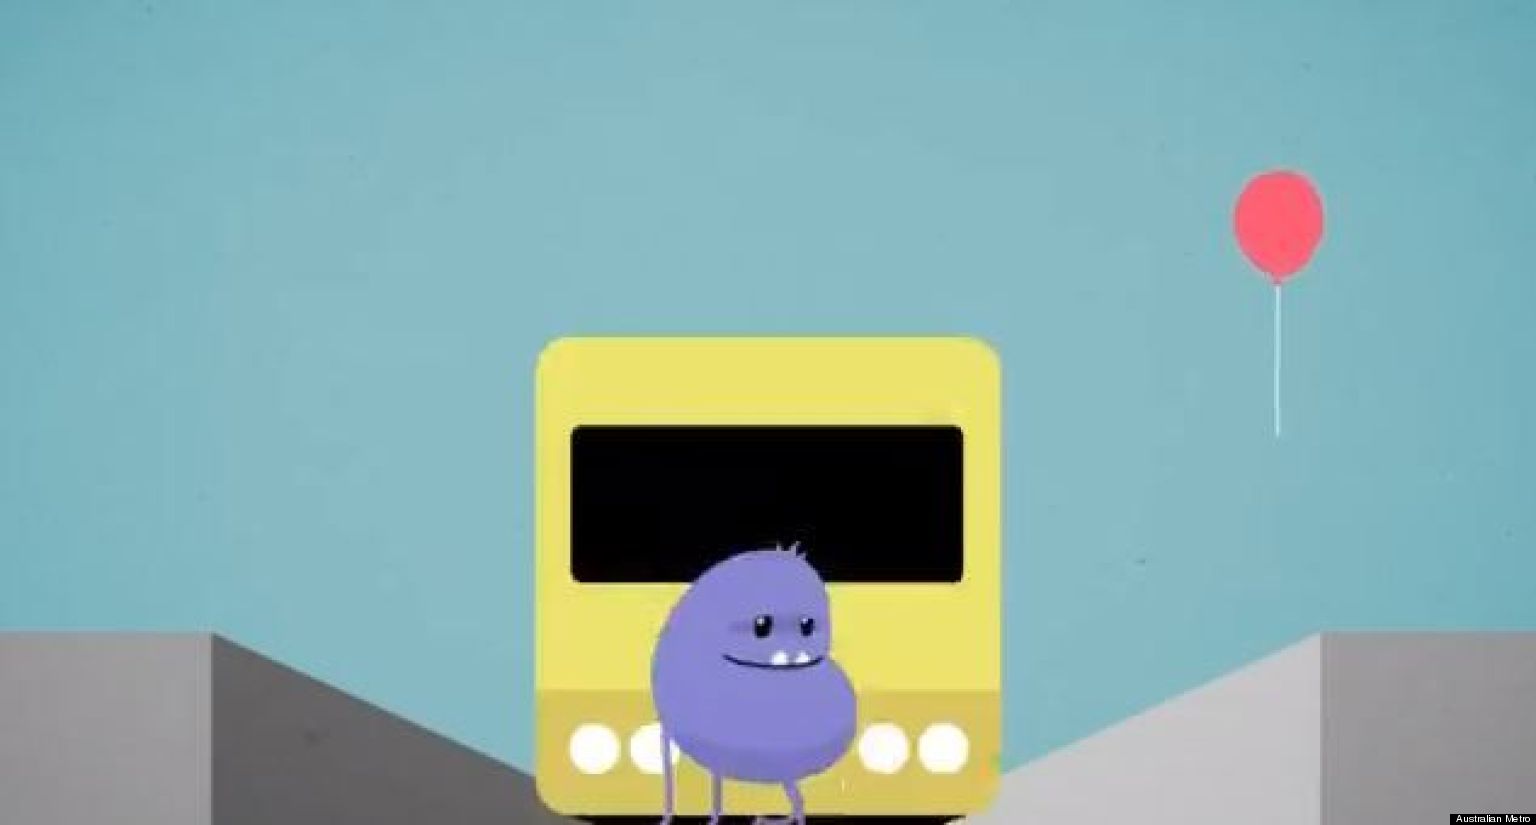 'Dumb Ways To Die' Song: Australian Metro Puts Out Adorably Animated